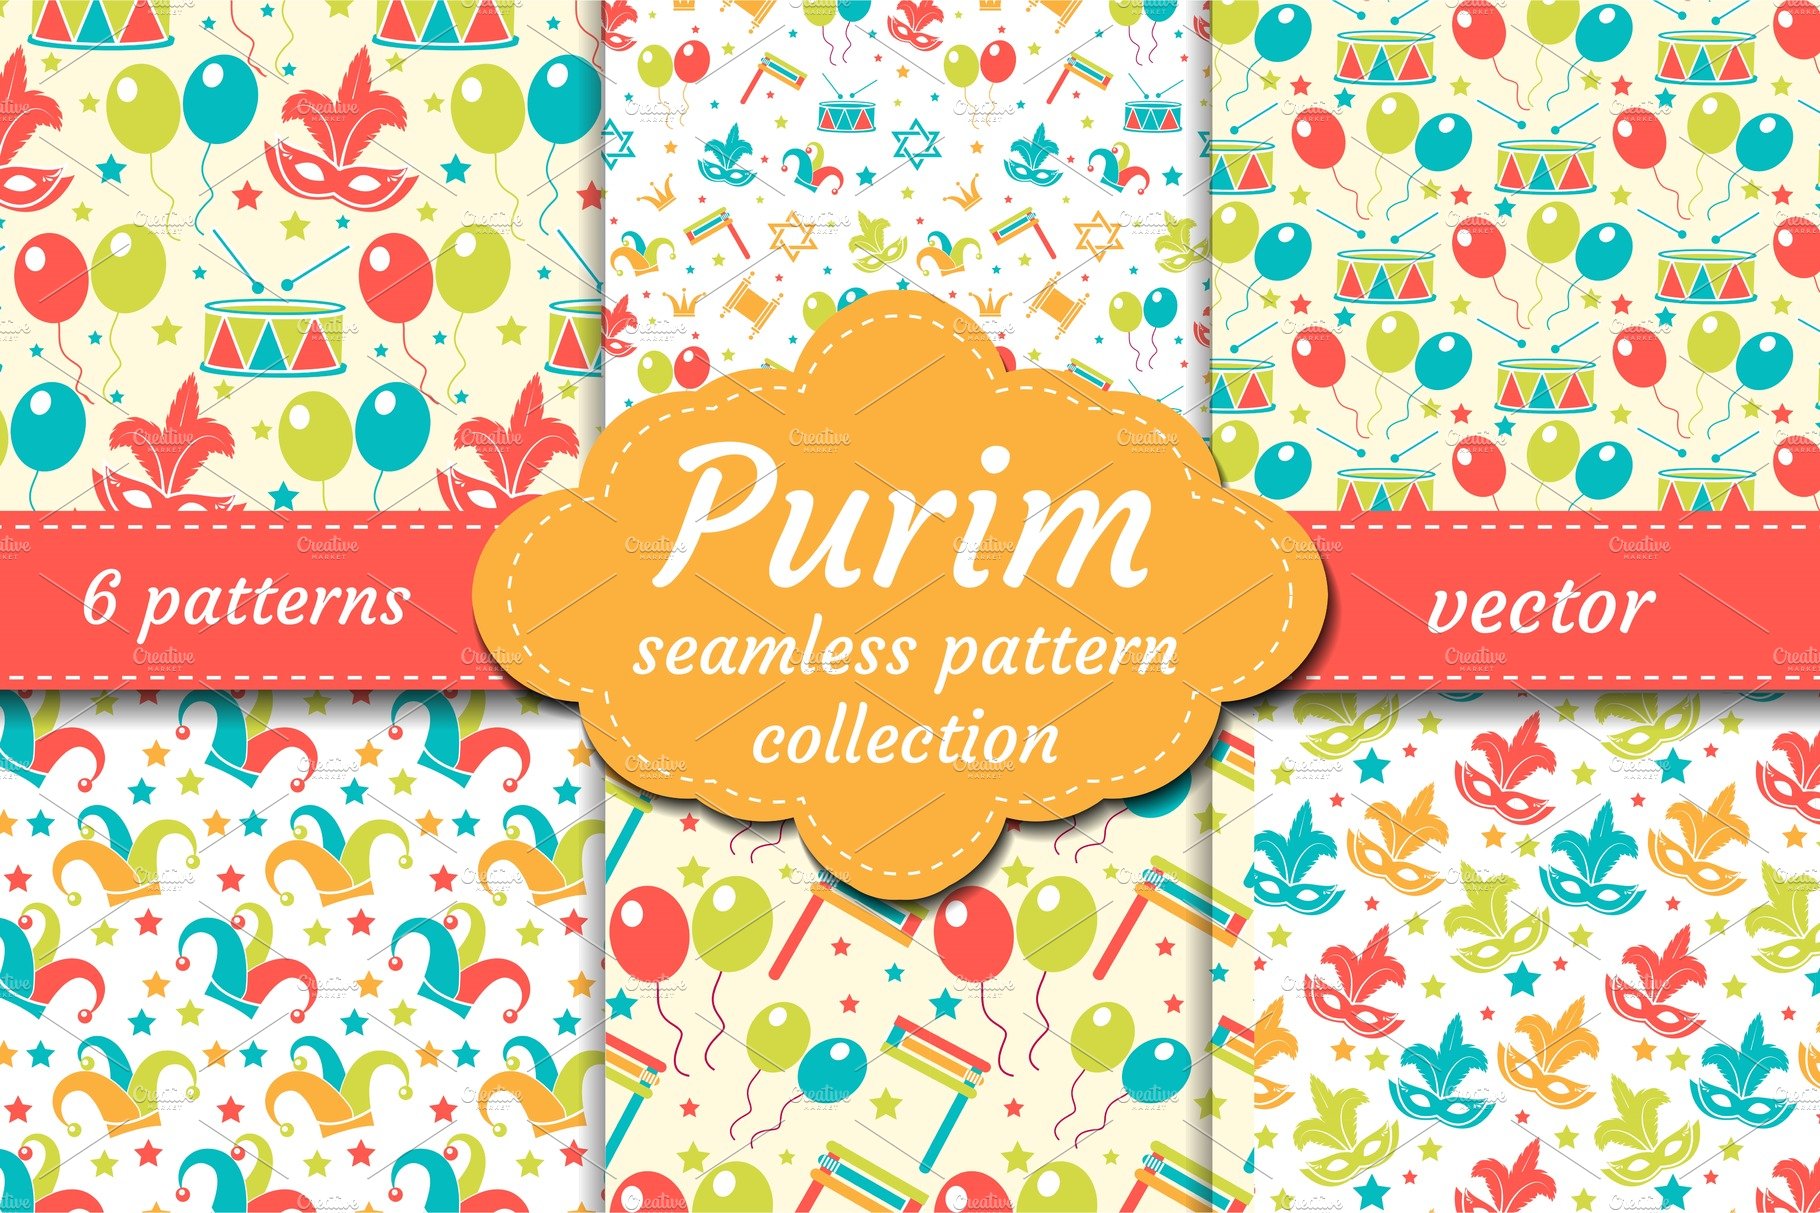 Colorful purim patterns.